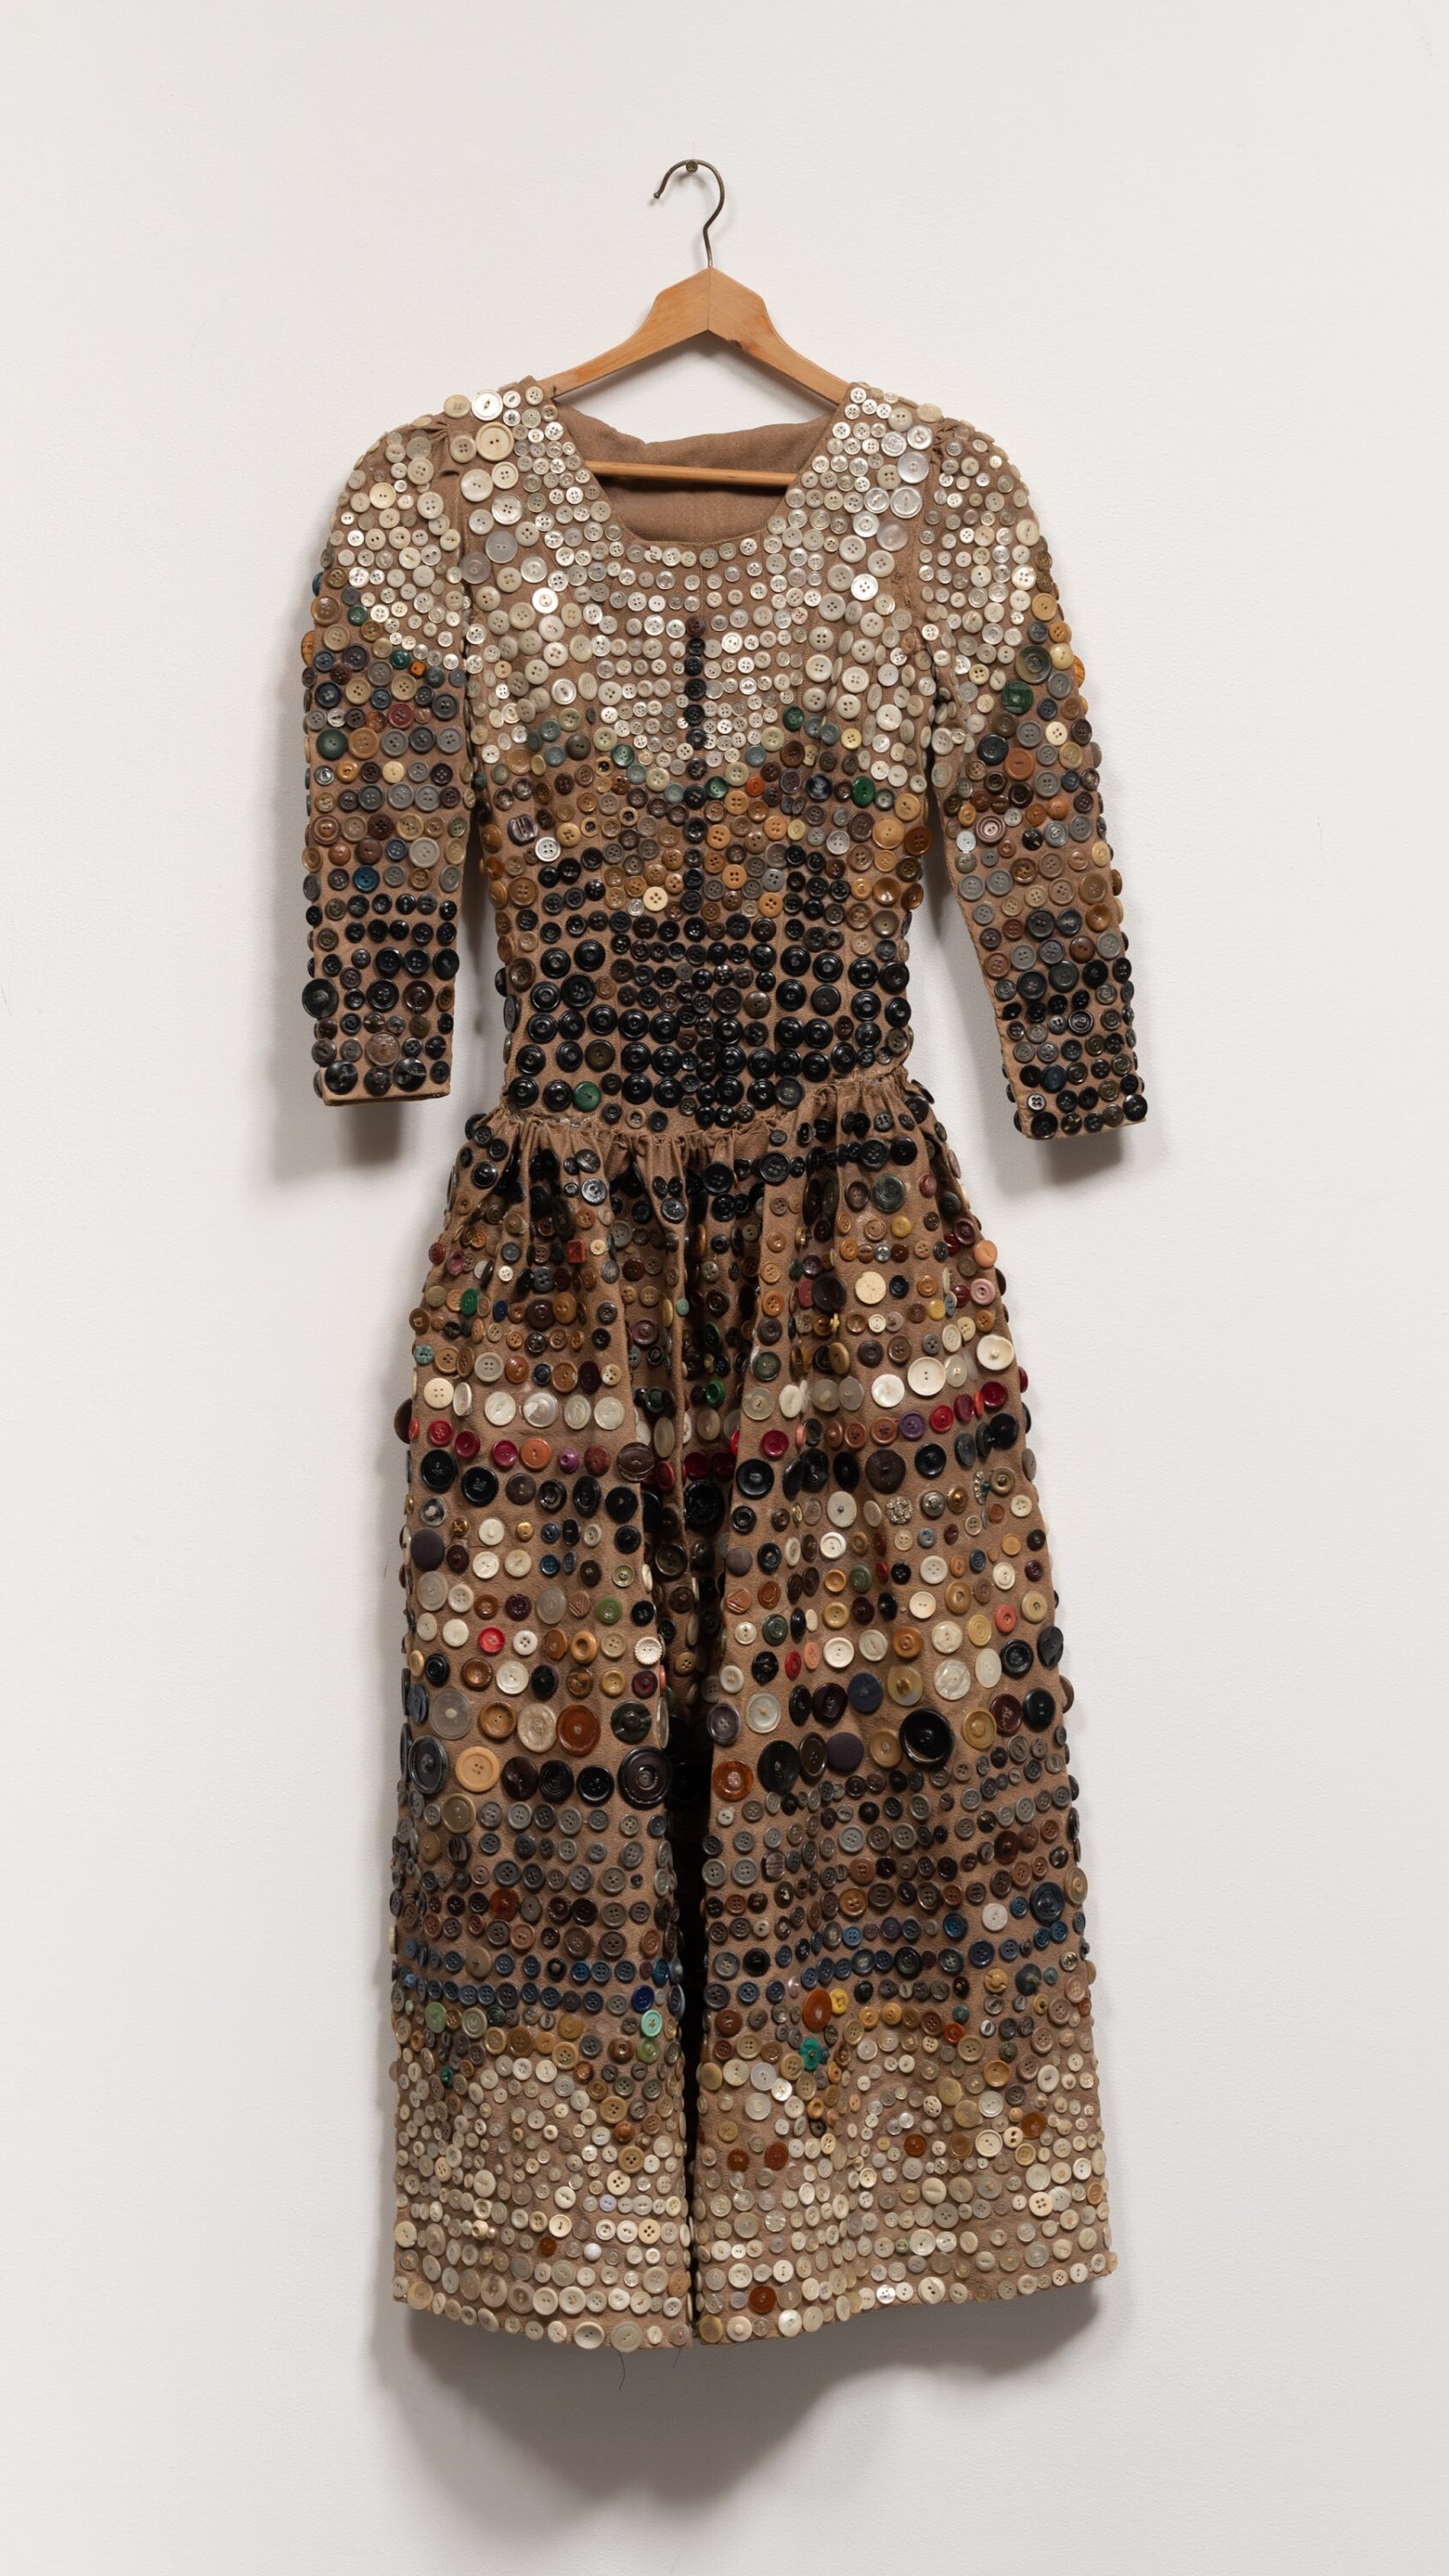 A dress made from earth-toned buttons hangs on a wooden hanger on a white gallery wall. The sleeves are three-quarter length and the skirt is long, possibly hitting at the mid-calves. Clear, white, tan, and dark brown and black buttons are arranged in rows and scalloped patterns.